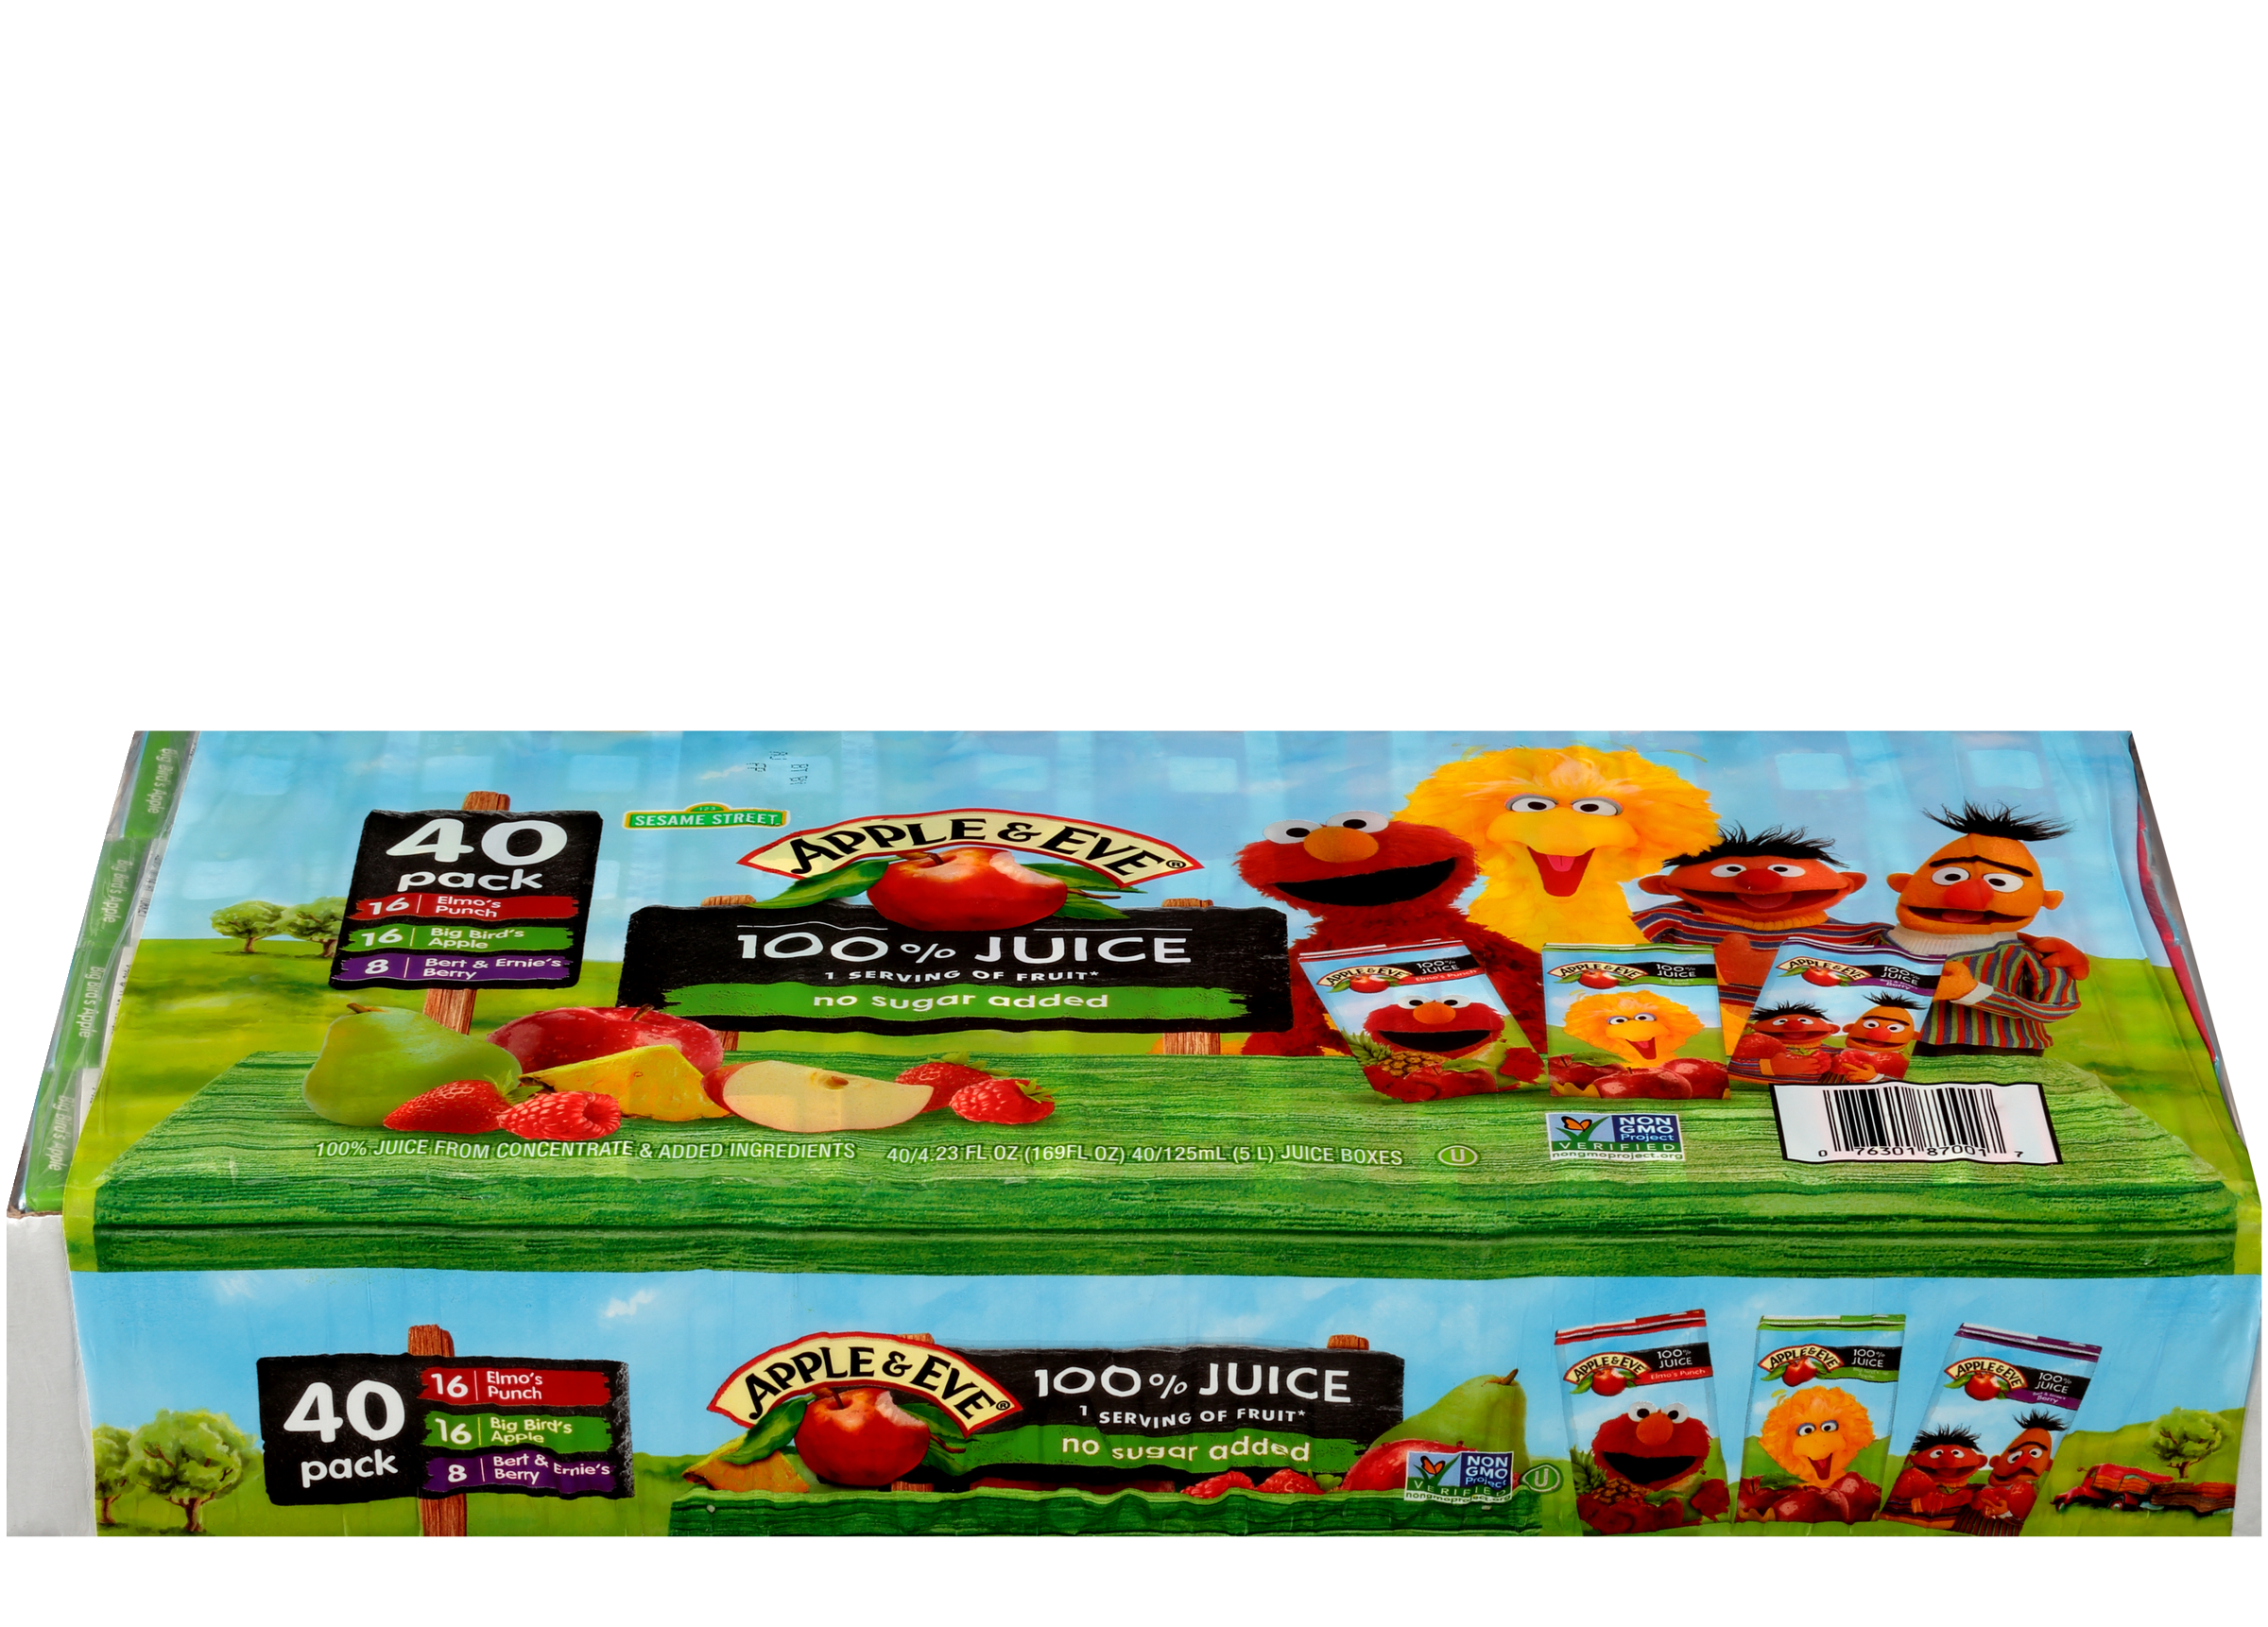 40 Count Variety Pack